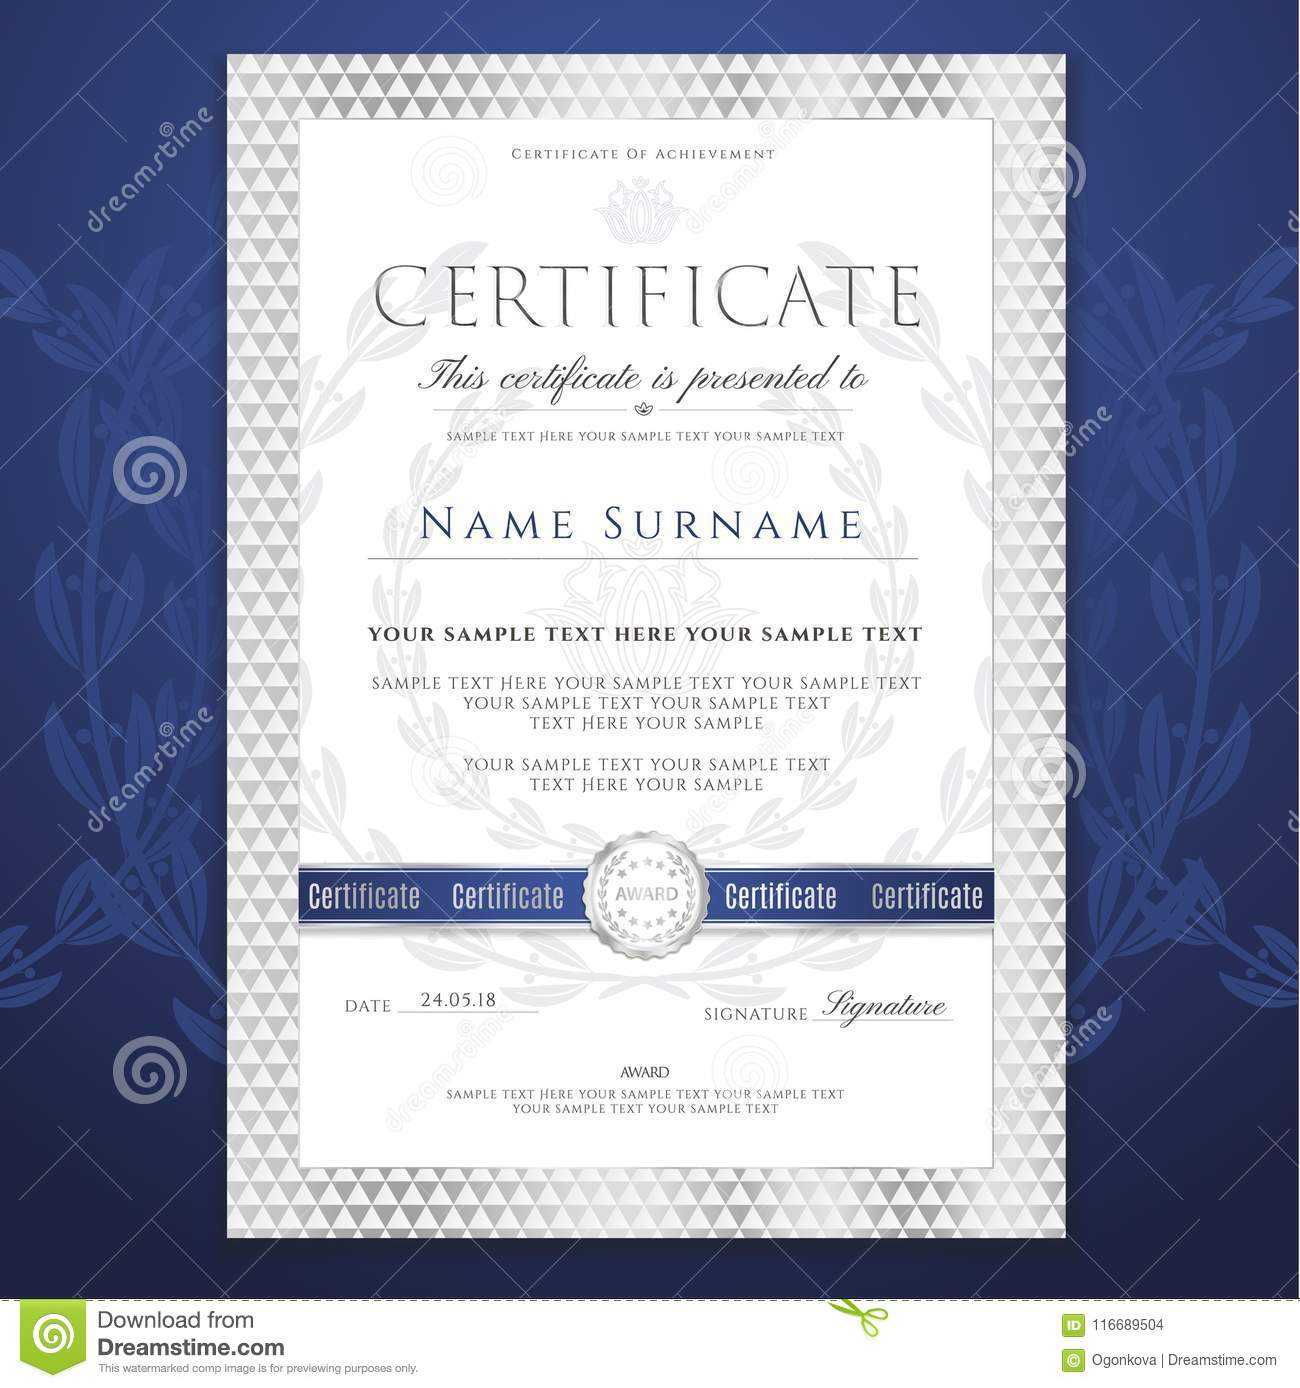 Certificate Template. Printable / Editable Design For Throughout Blank Certificate Of Achievement Template